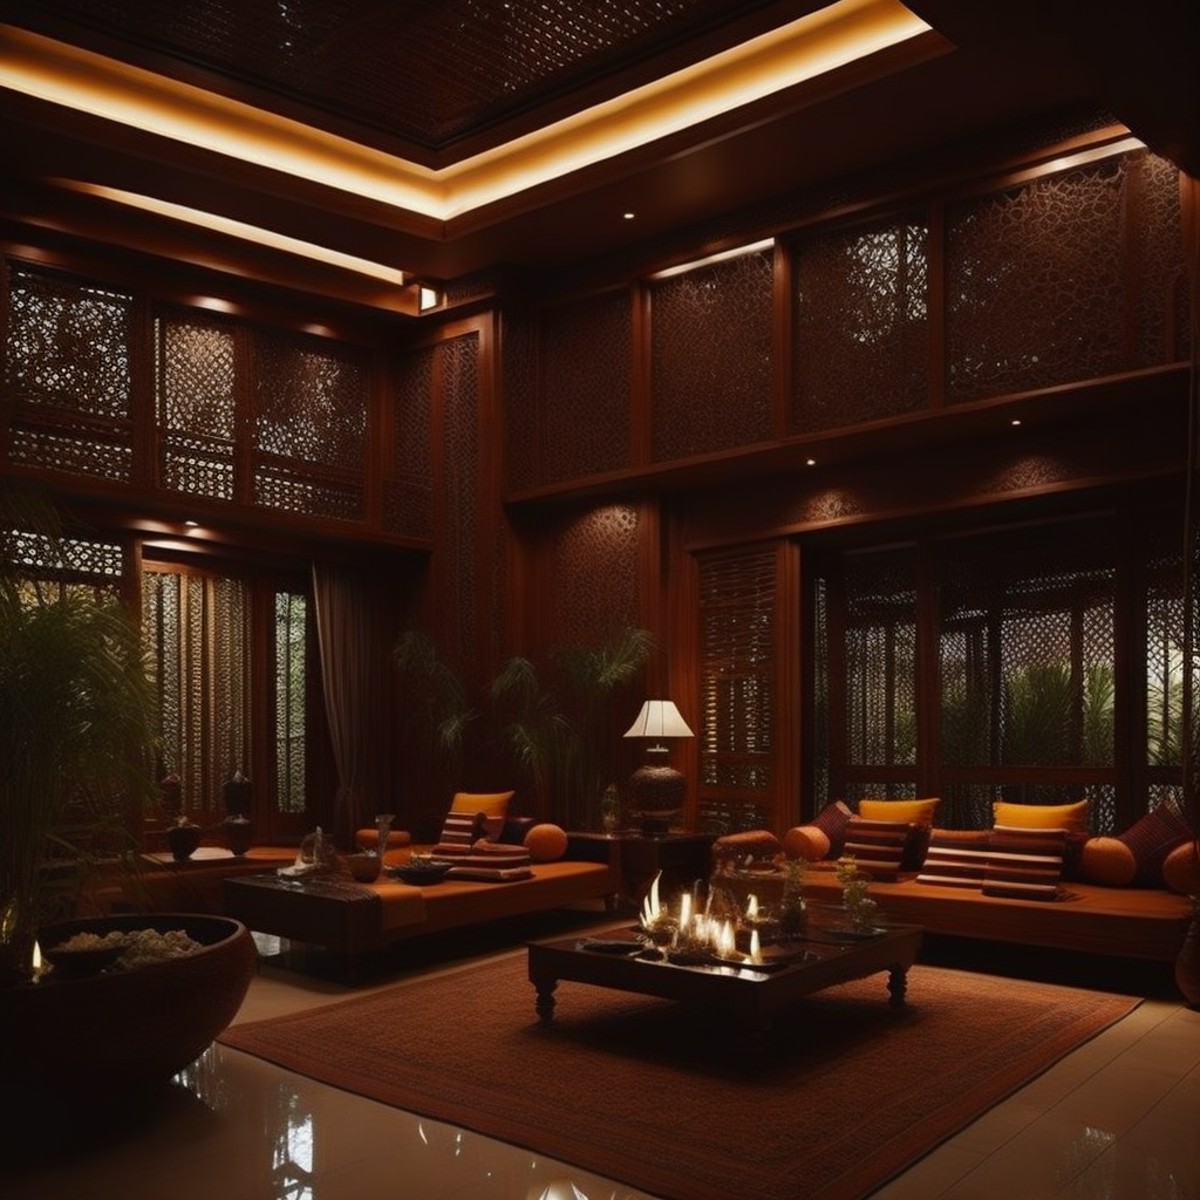 02119-1555505076-Indian style interior design of SPA.png